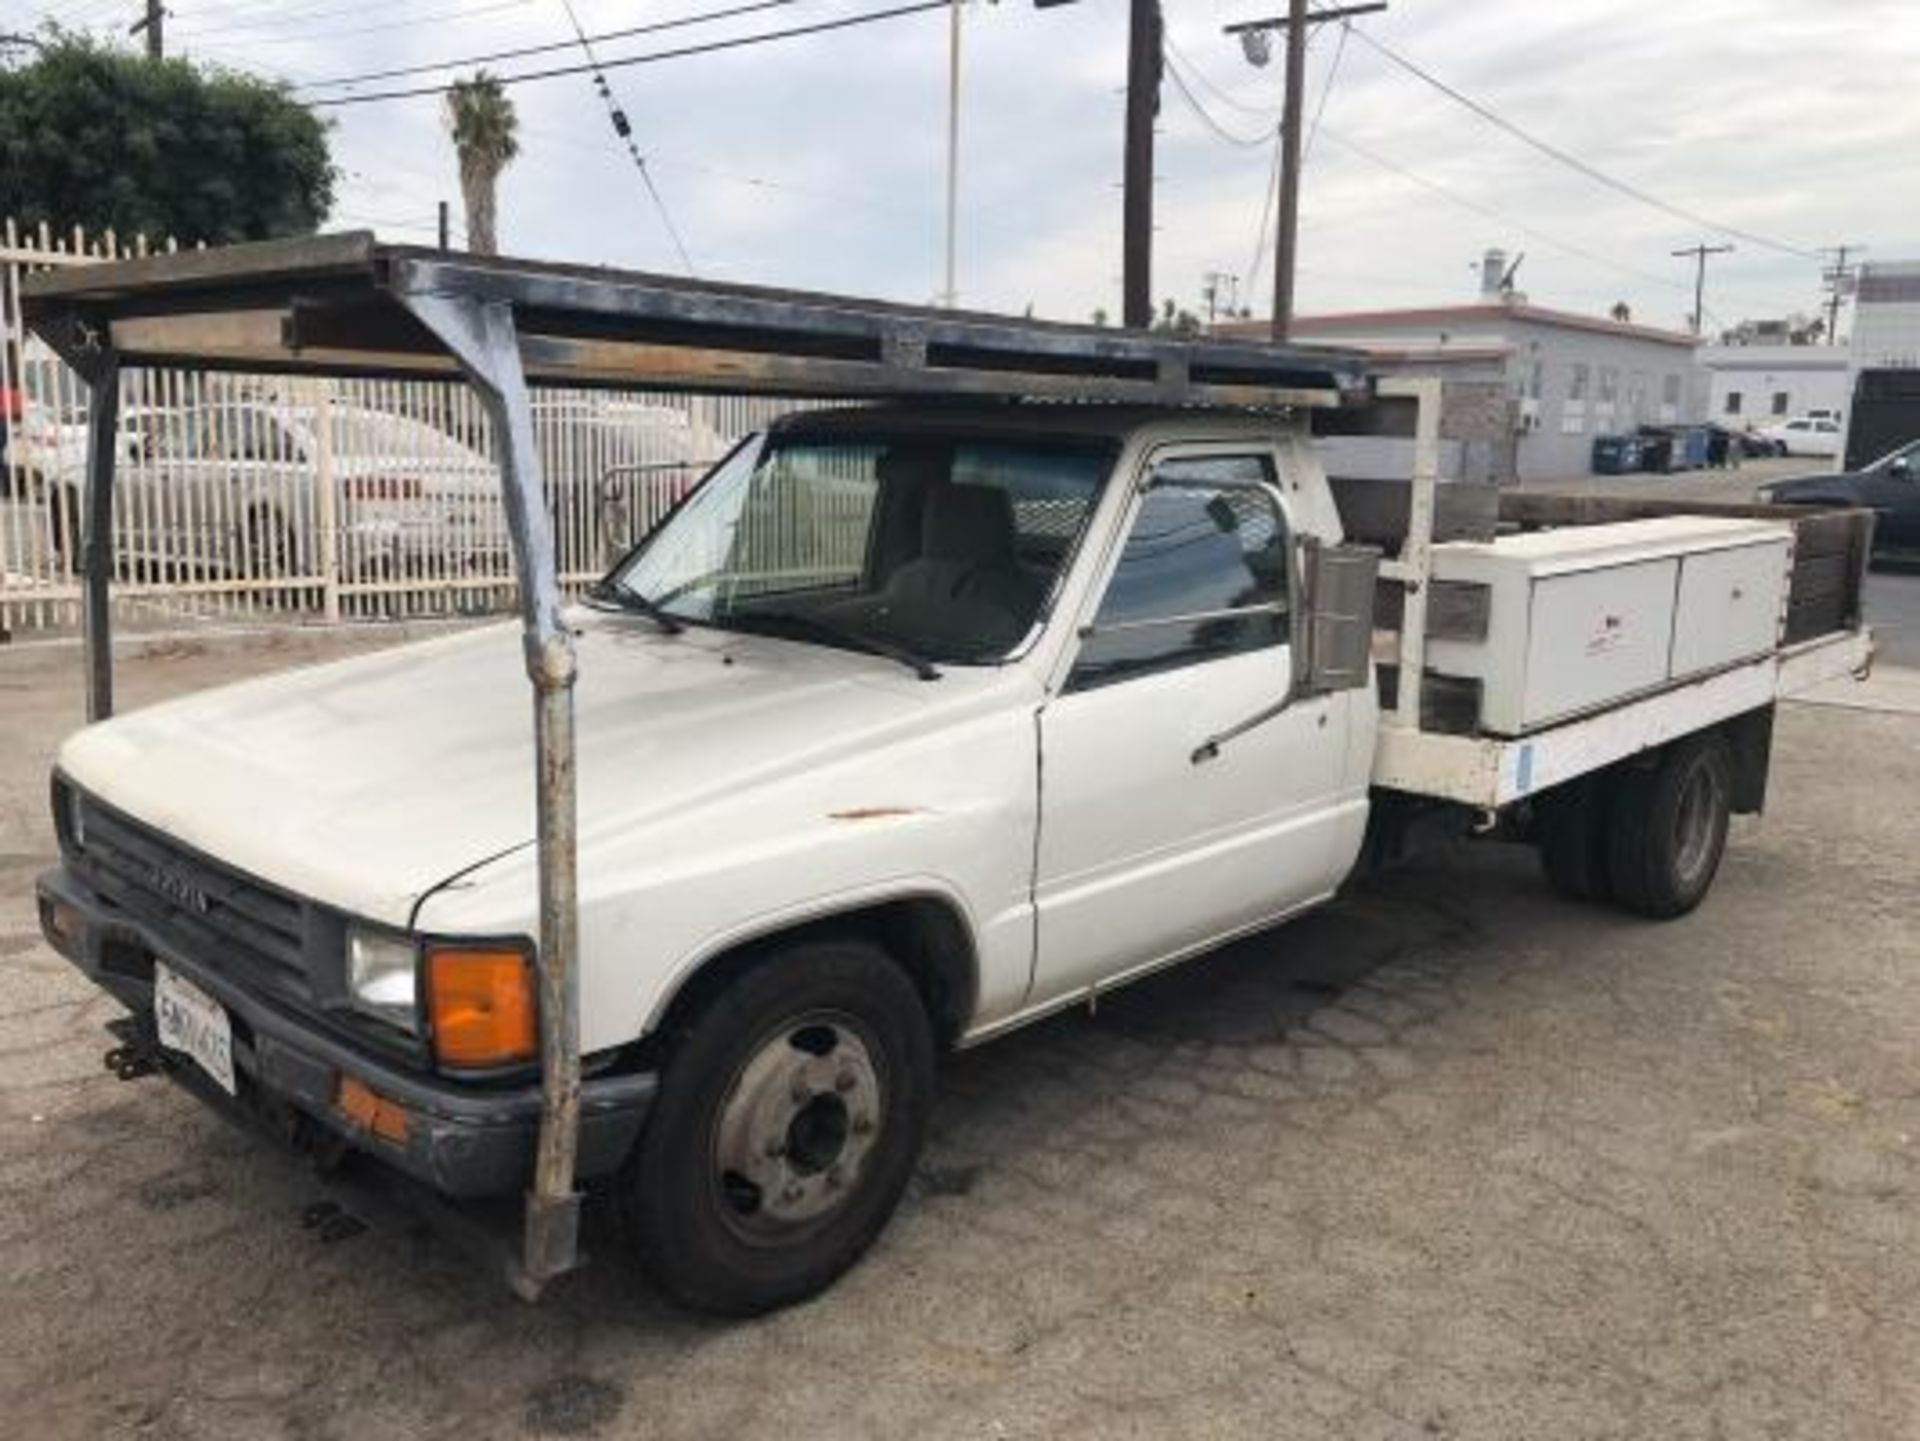 Toyota 9' Stake Bed Truck Lisc# 5M74615 w/ Gas Engine, Manual Trans, Dual Rear Wheels, 173,859 Miles